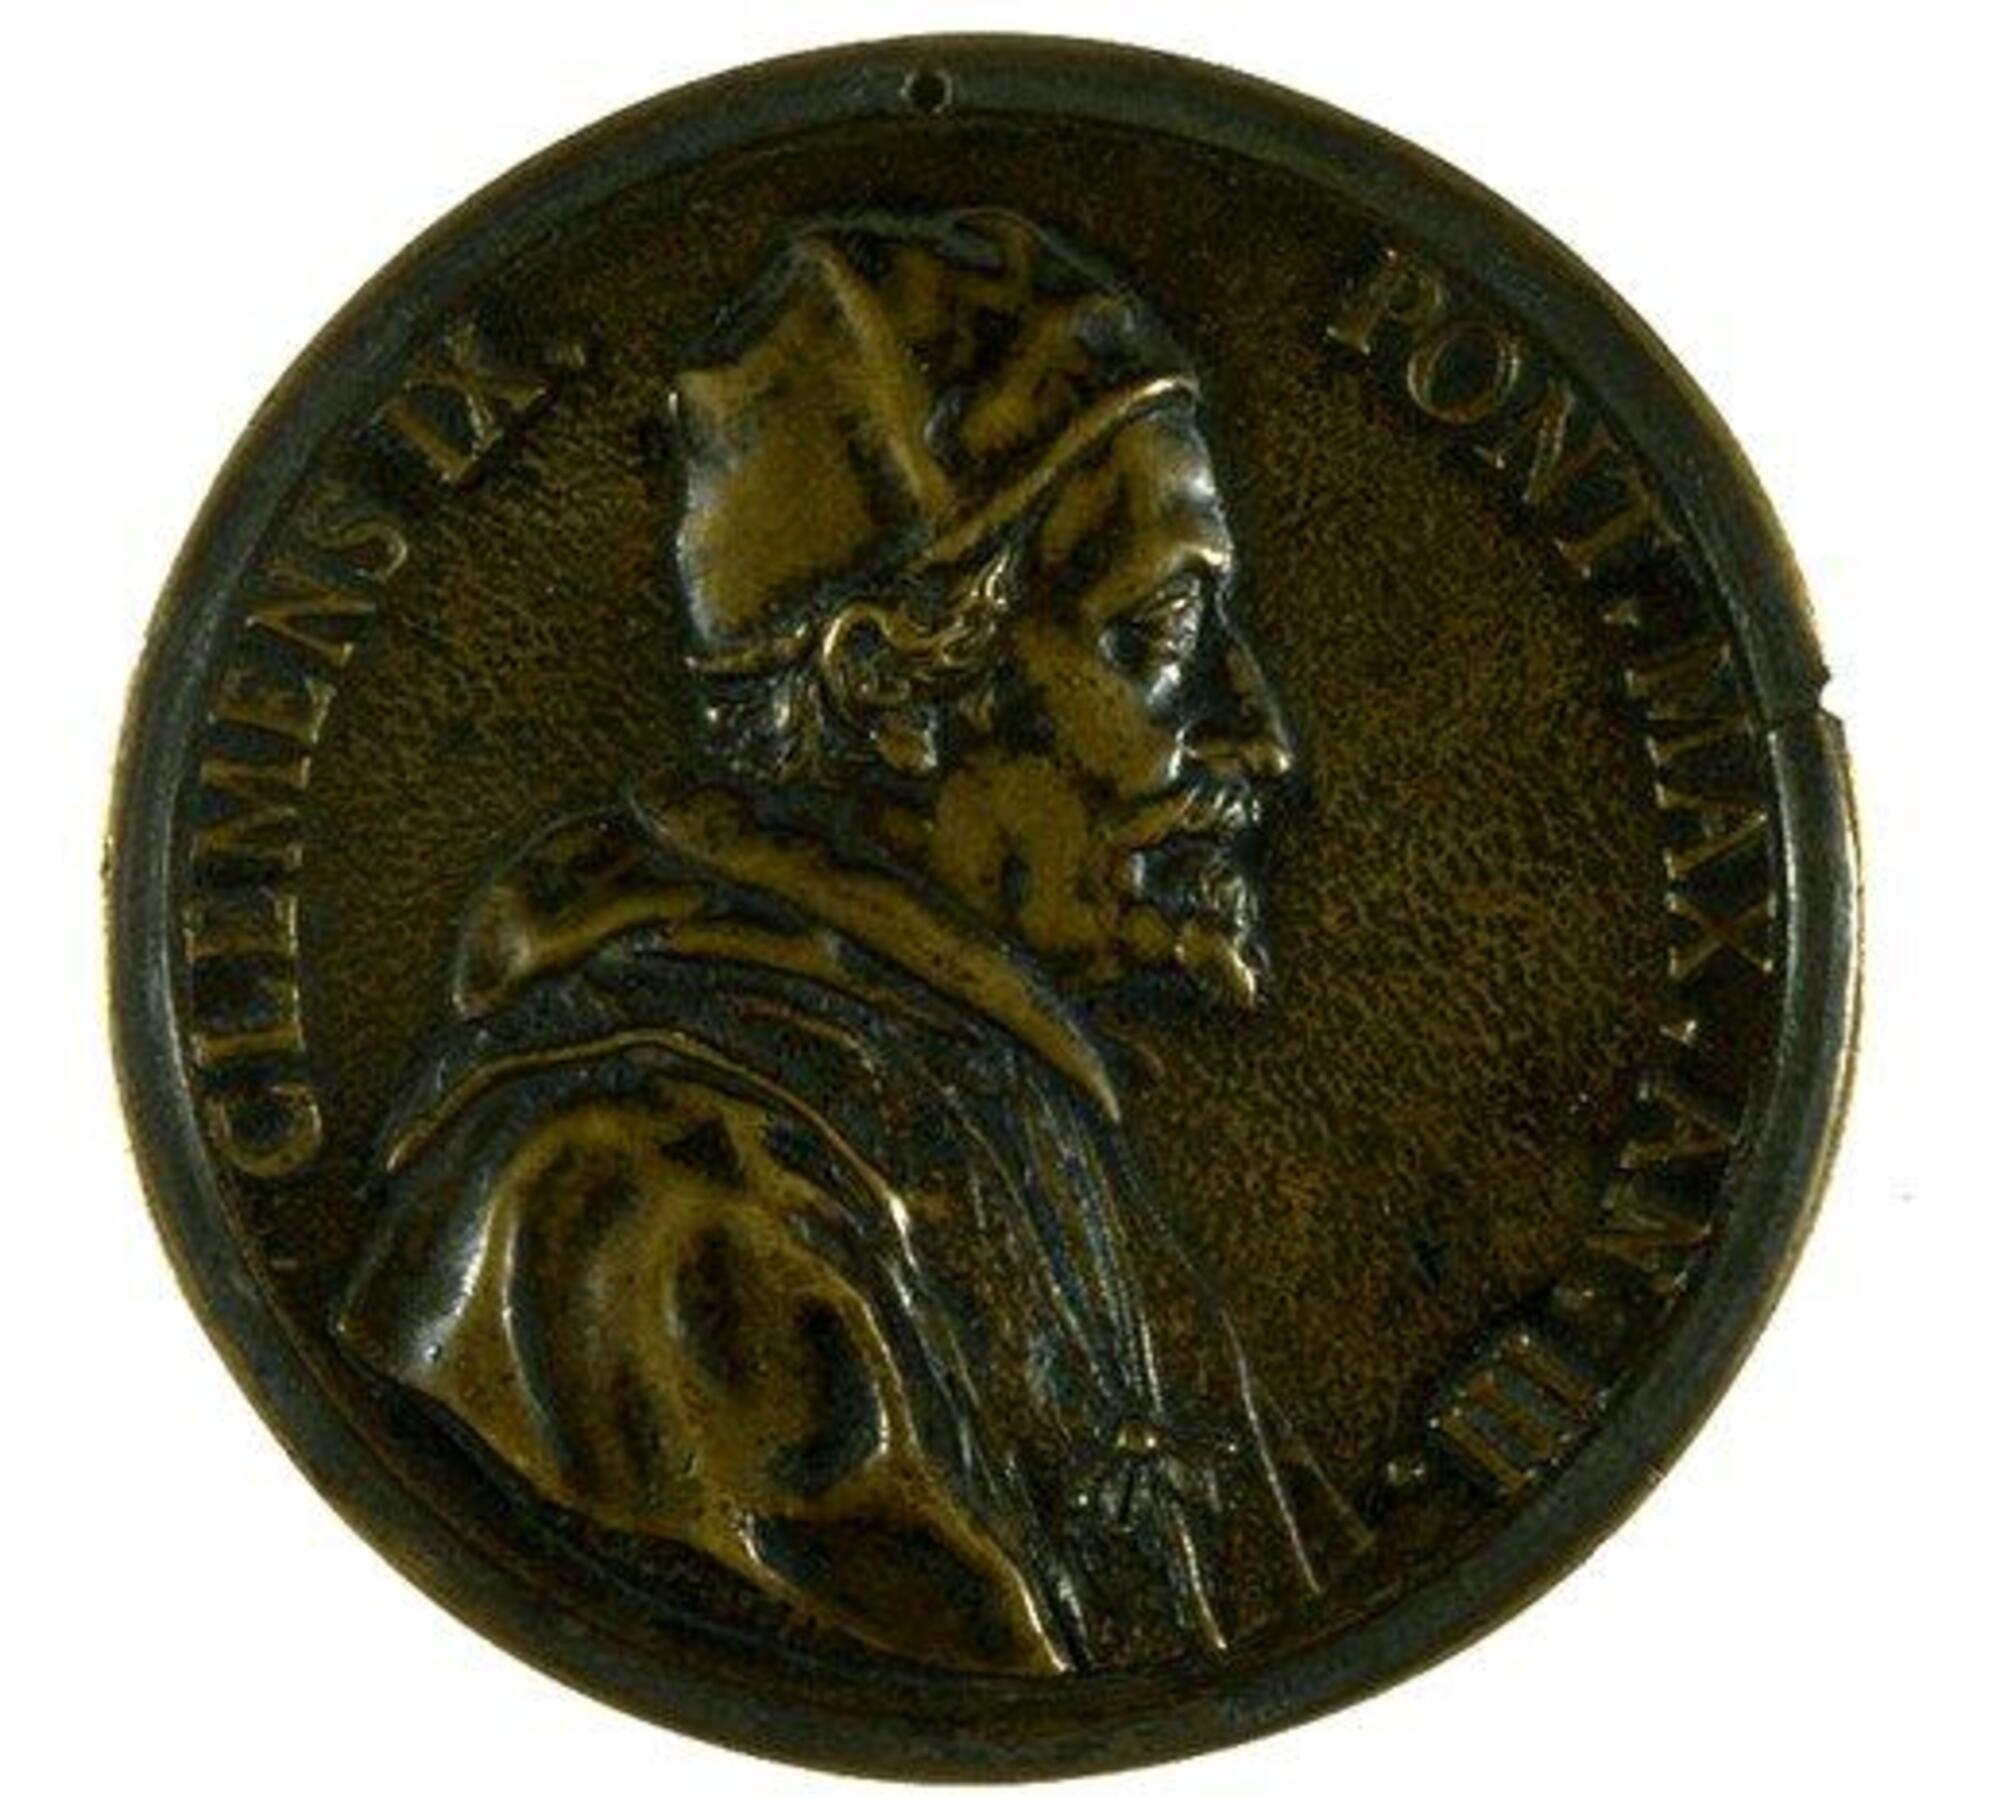 The front (obverse) of the medal presents a profile portrait of a bearded man wearing a cassock, cap, and stole. The reverse depicts a bridge spanning a river. A winged figure flies above the bridge blowing a trumpet, while a nude male figure reclines below the bridge in the foreground and a wolf nurses at his feet. Inscriptions run around both the border edge of both sides of the medal.